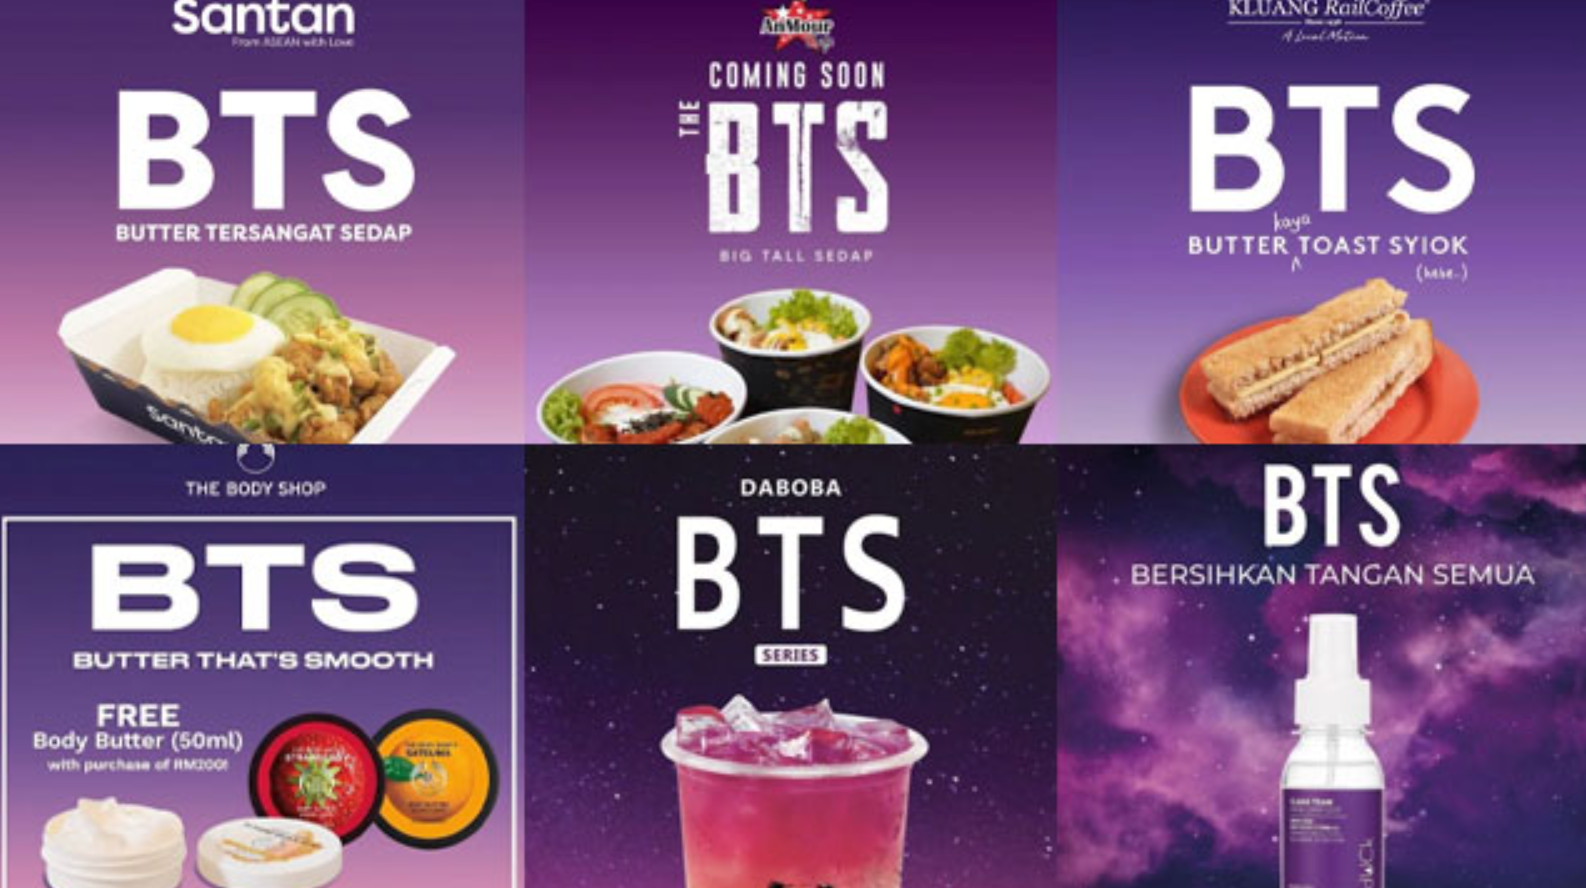 Companies begin capitalizing off the BTS brand and name - DAILY NAVER